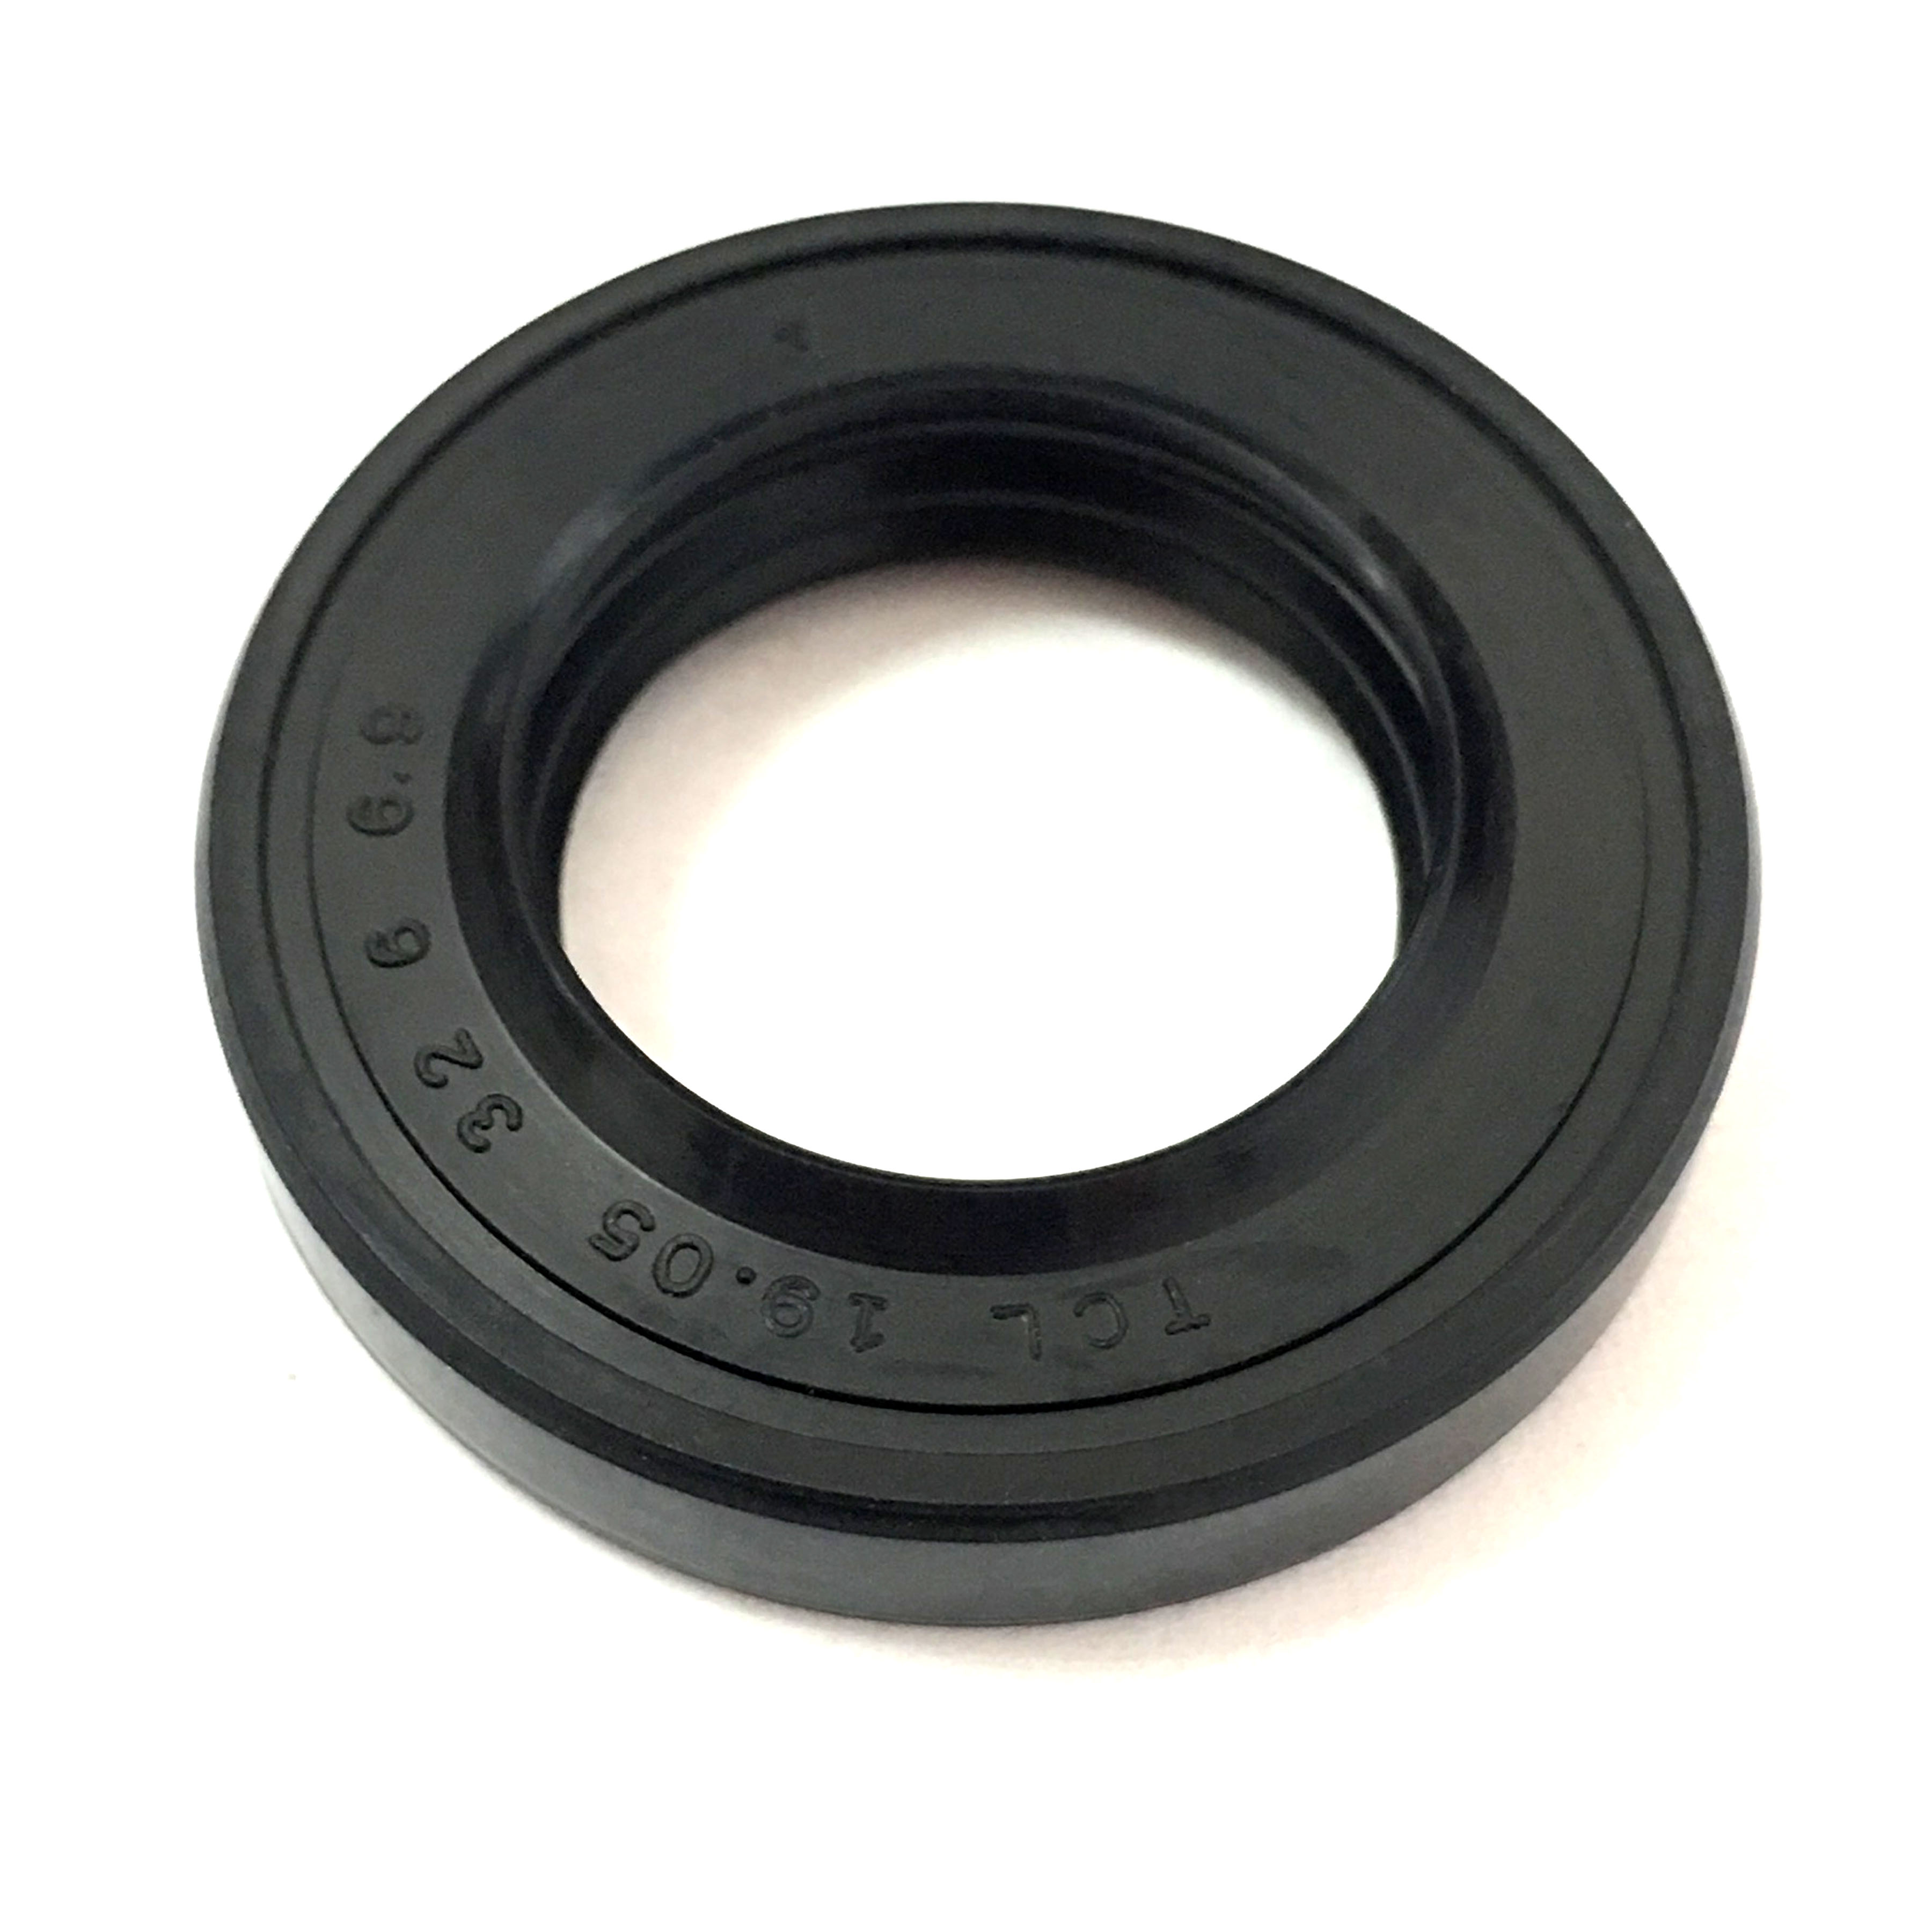 TCL Oil Seal 19.05*32*6/6.9